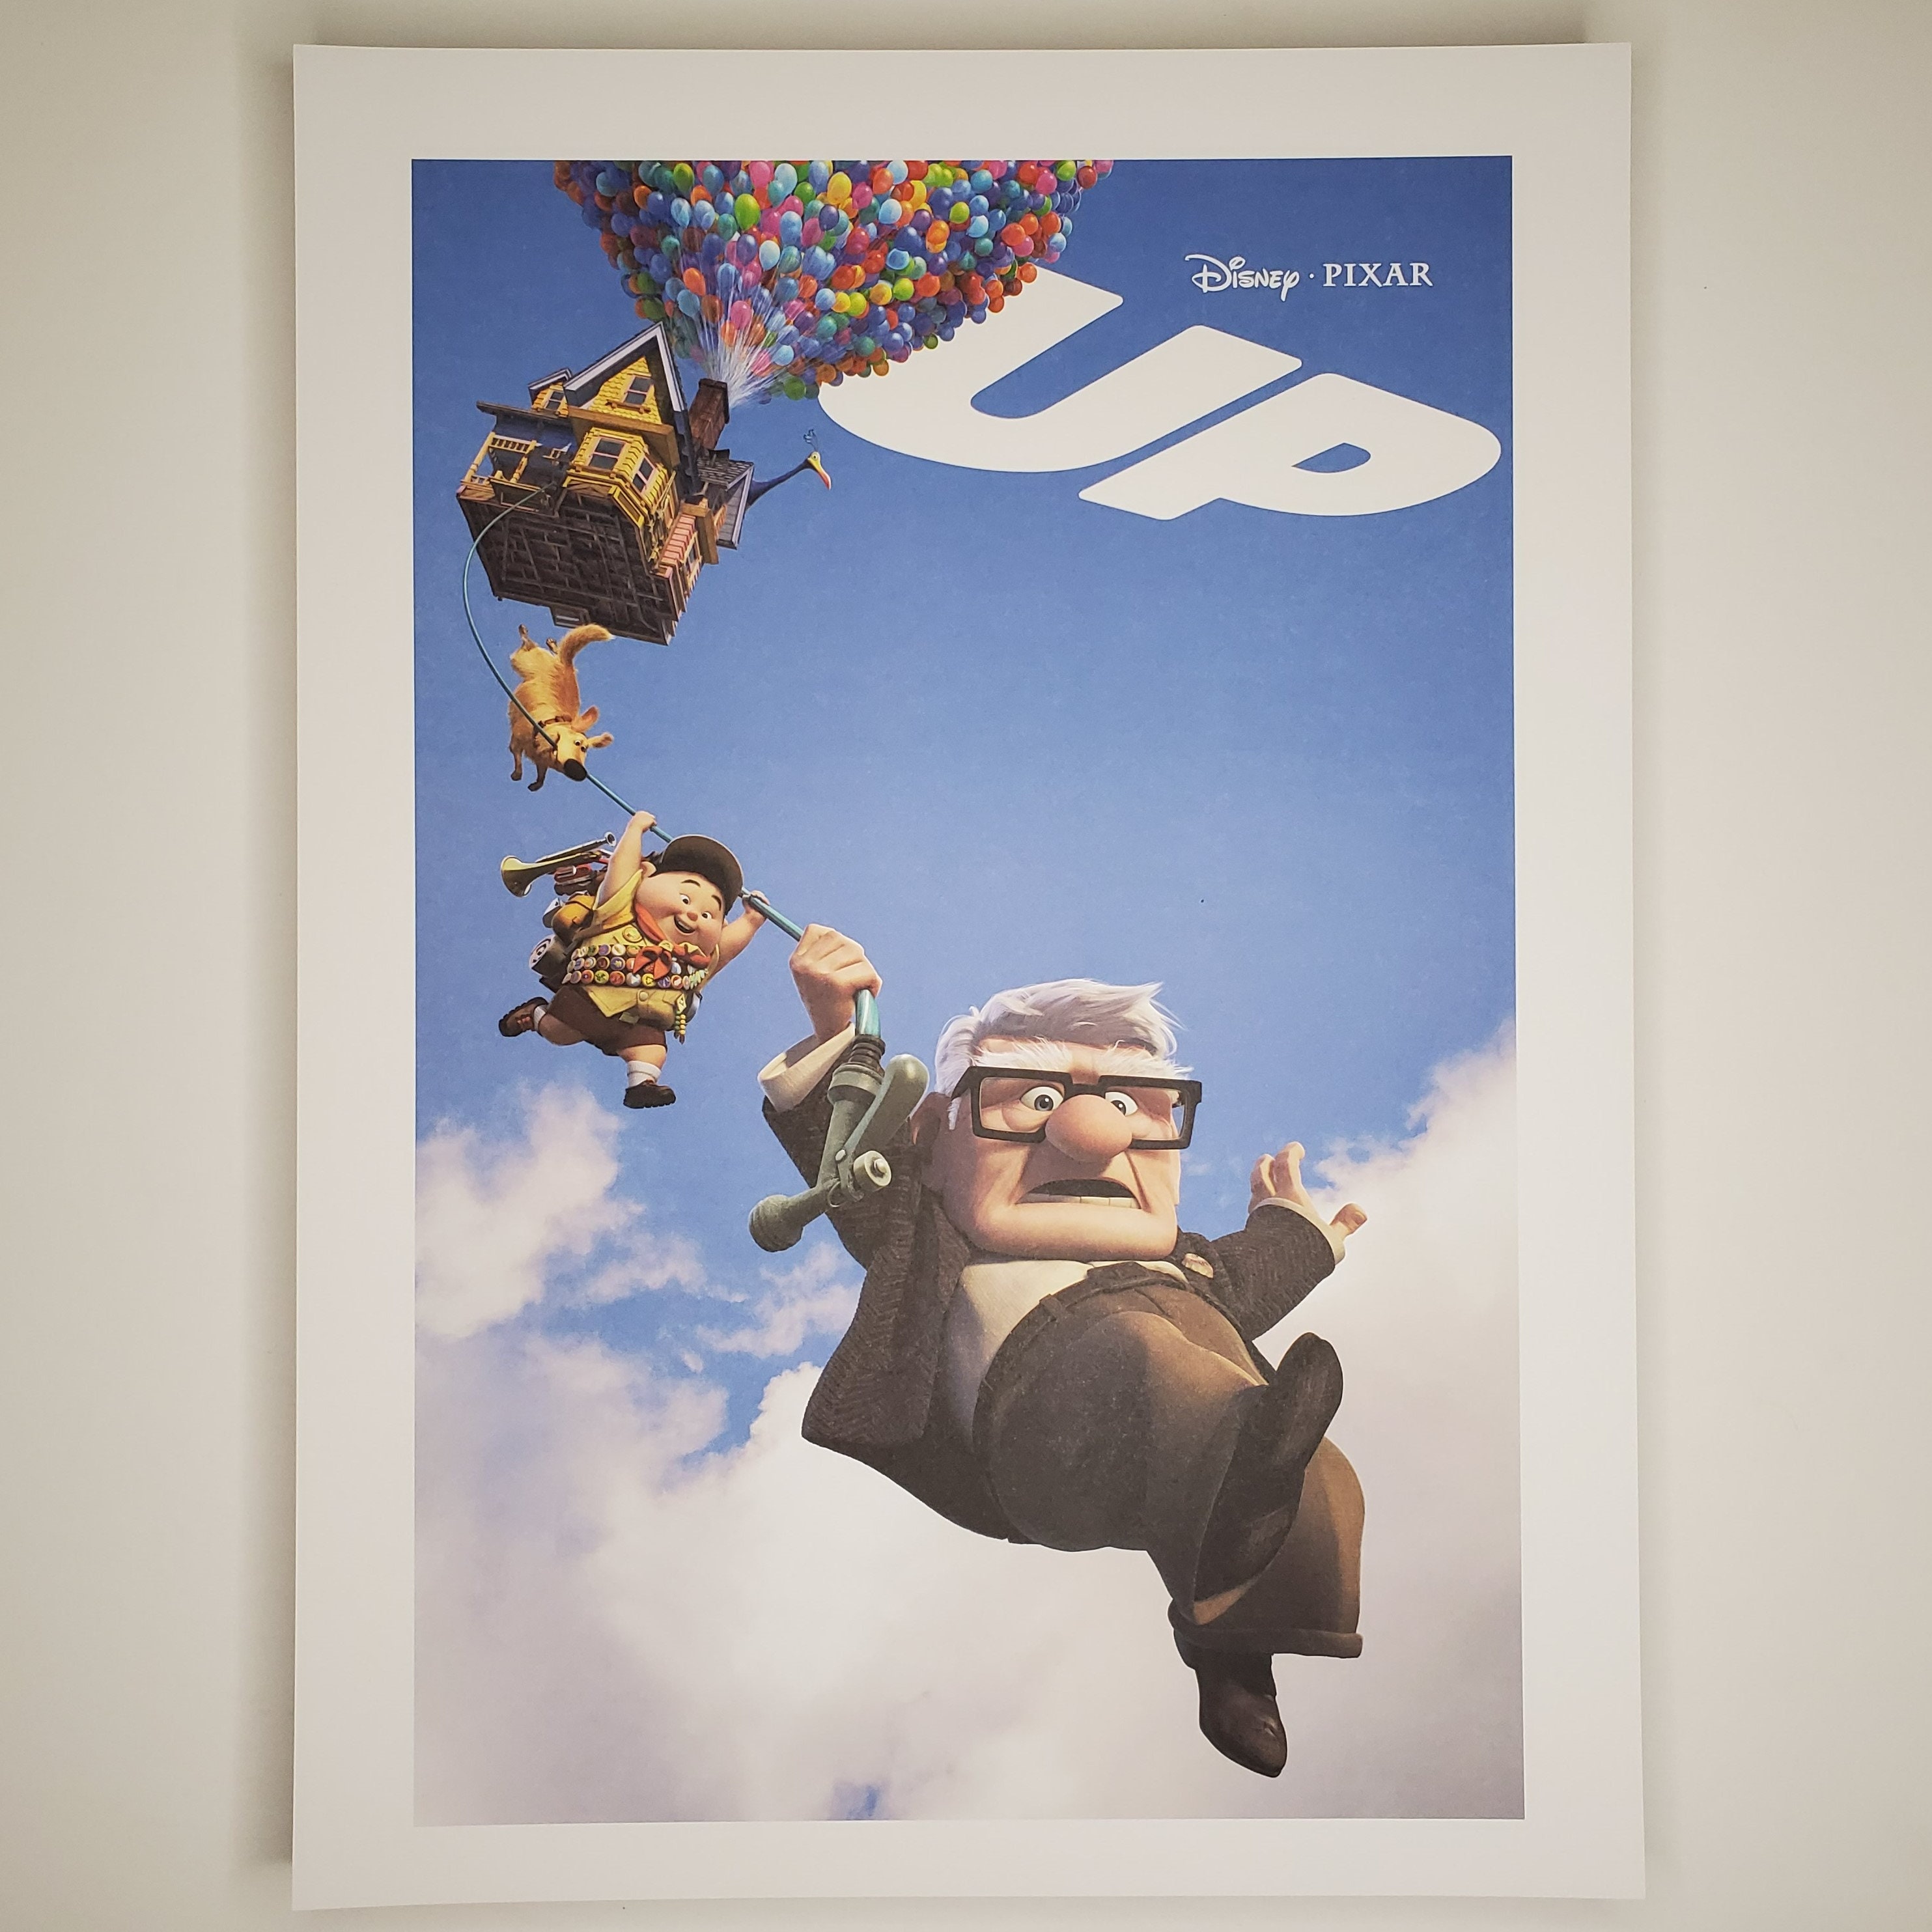 UP Movie Poster Authentic Disney Pixar Poster Art 11.5x16 Lithograph Carl  Russell Dug